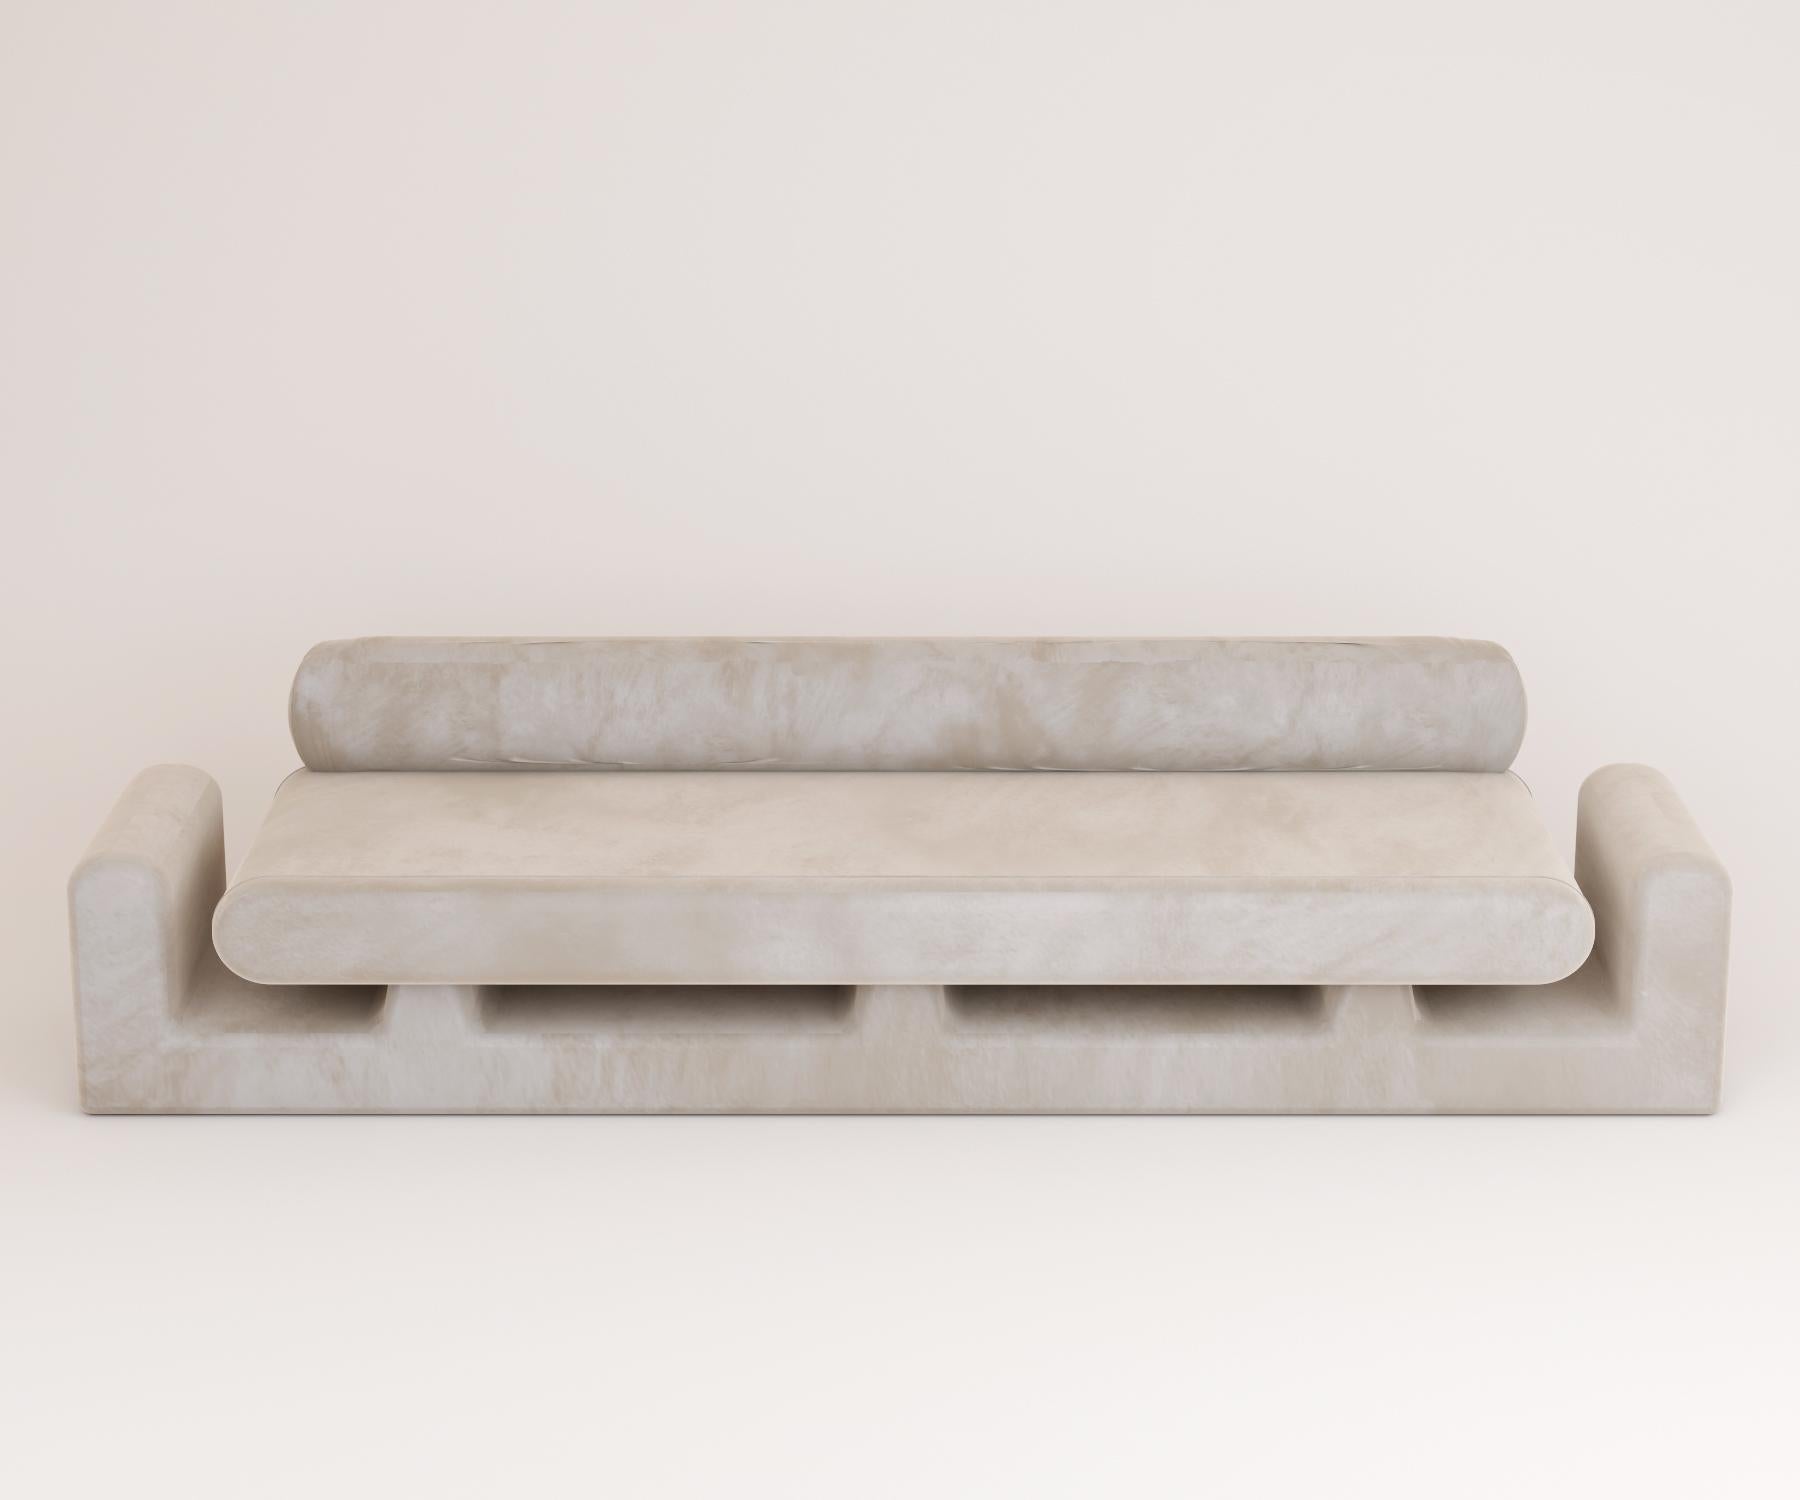 Hug Grey Sofa by Rejo Studio
Dimensions: D 315 x W 95 x H 76 cm
Materials: Wooden structure, with Velvet
Also Available in different colours.

Long comfortable hug. The hug sofa features two welcoming chubby arms and a magical handy space for